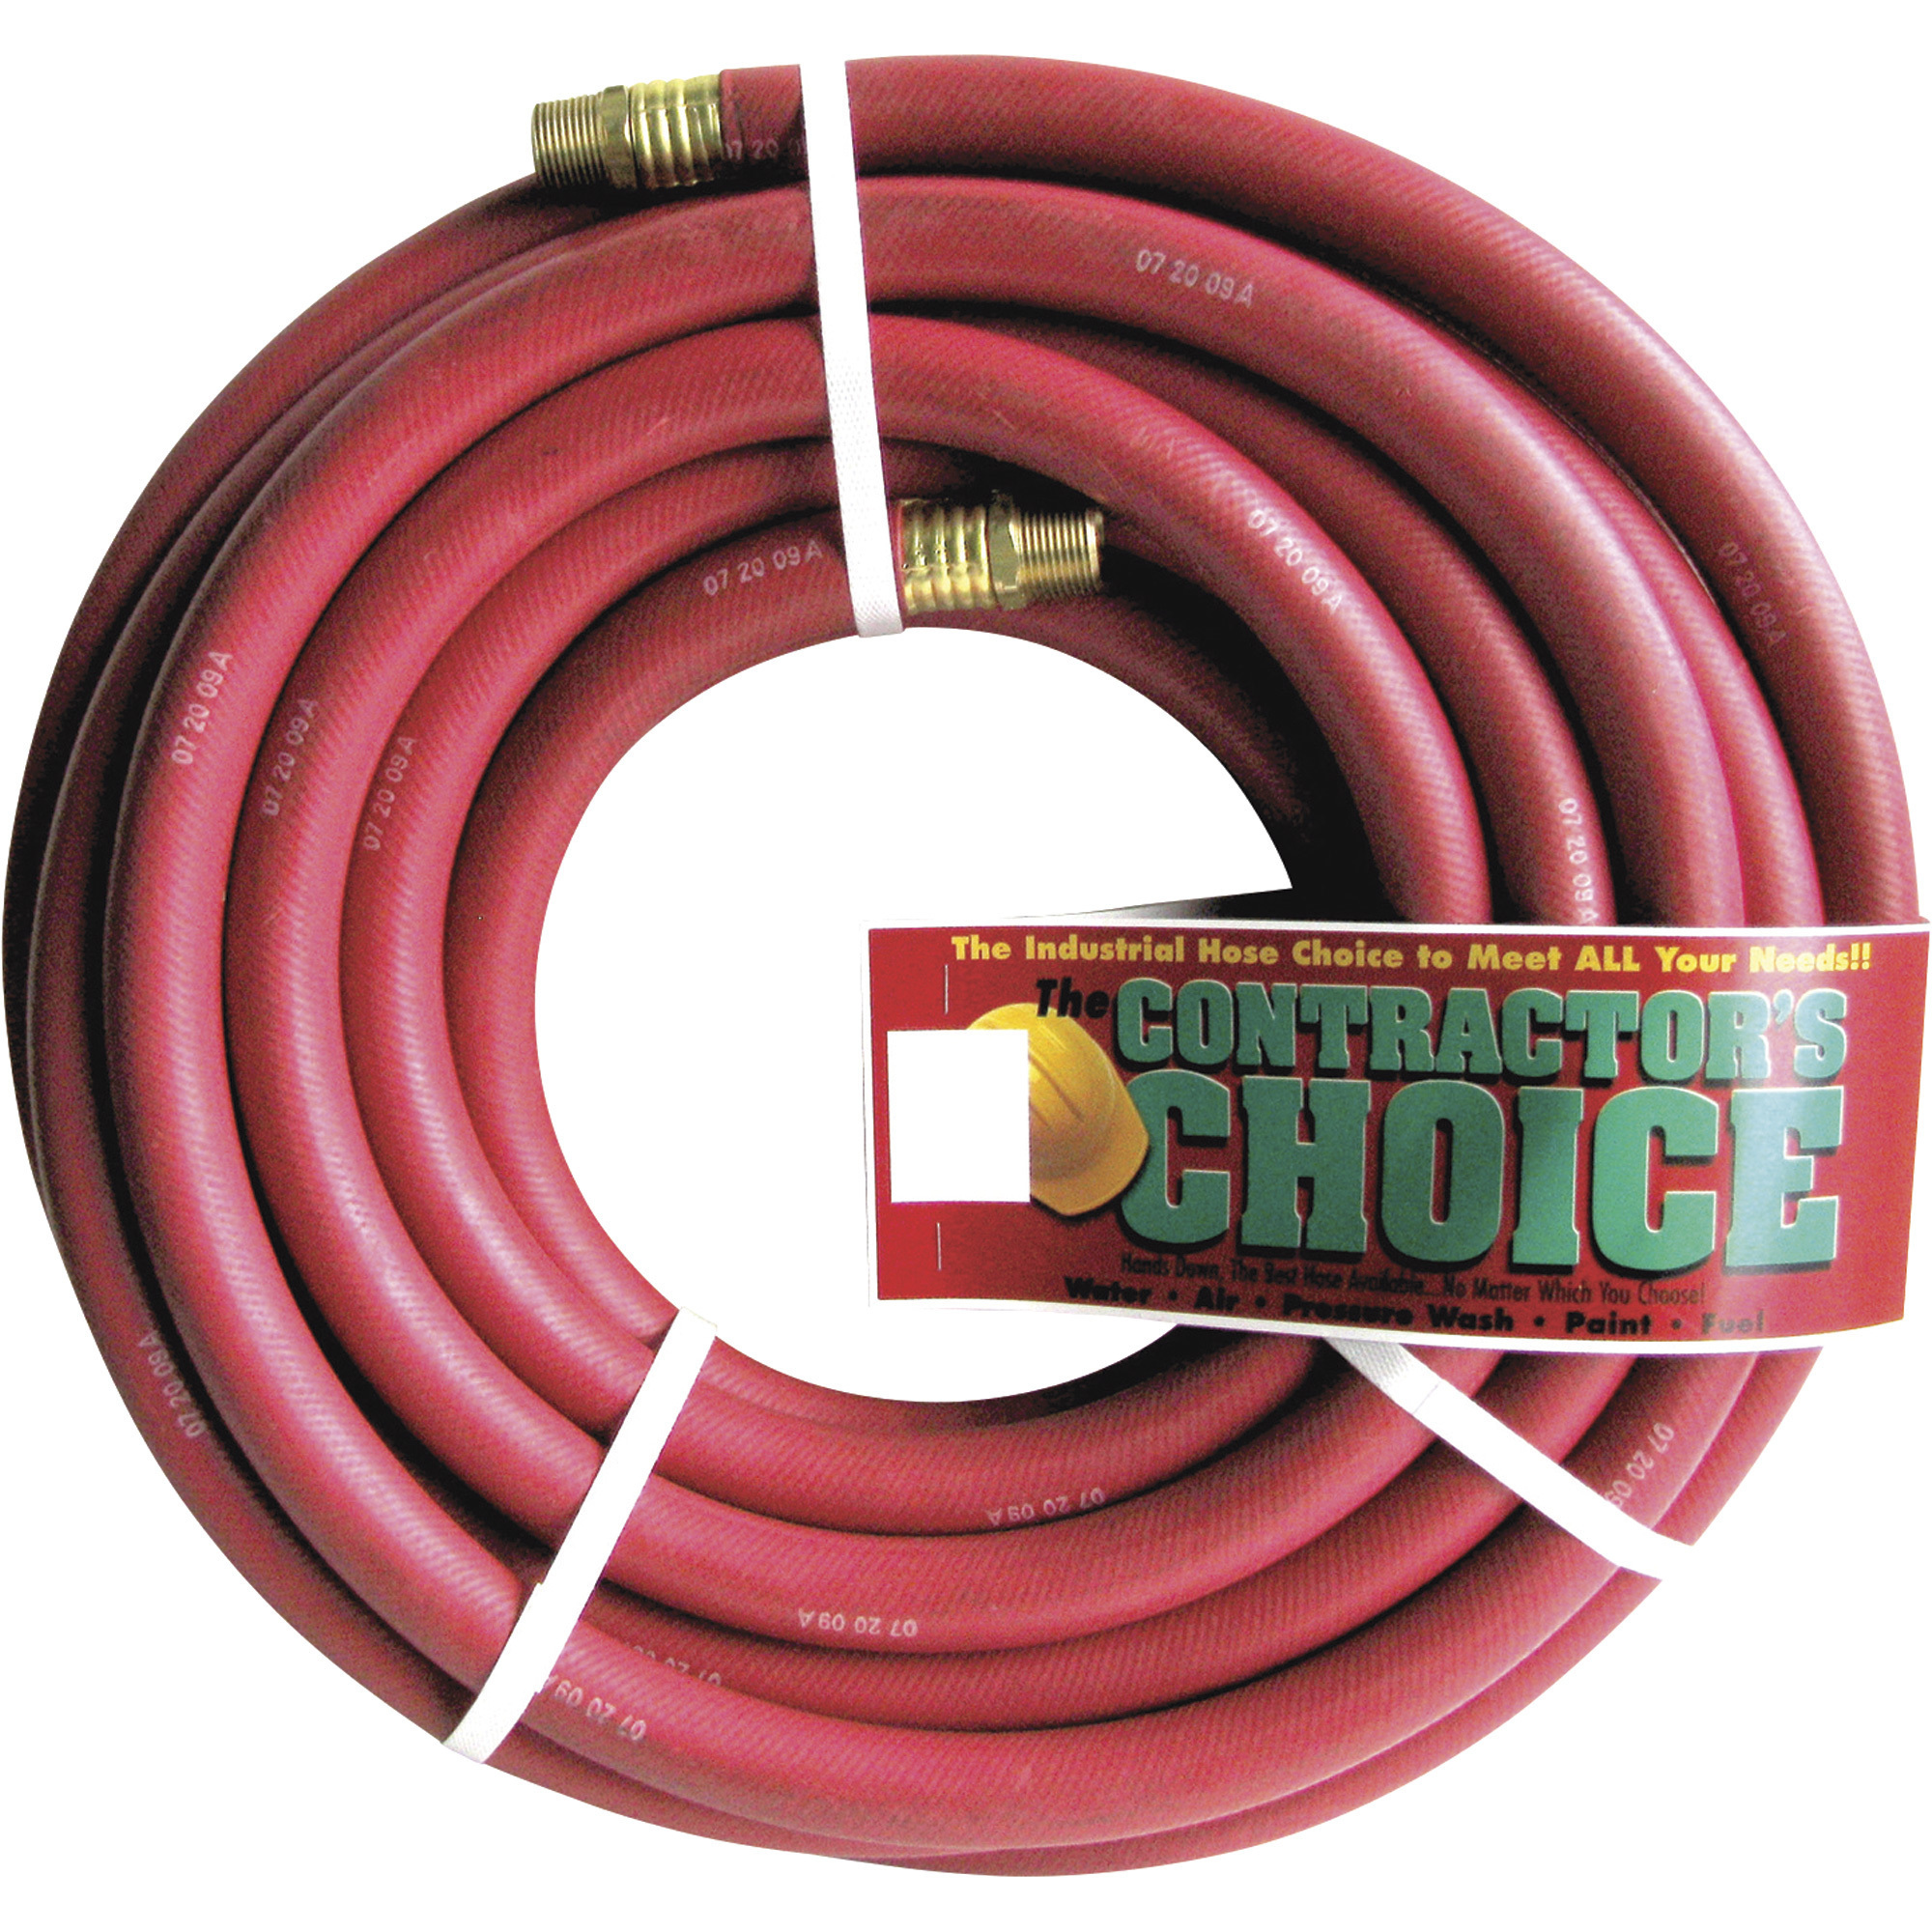 Industrial Red Rubber Hose â 3/4Inch x 50ft., 3/4Inch NPT Fittings, 200 PSI, Model RR3/4X50-200-12MP